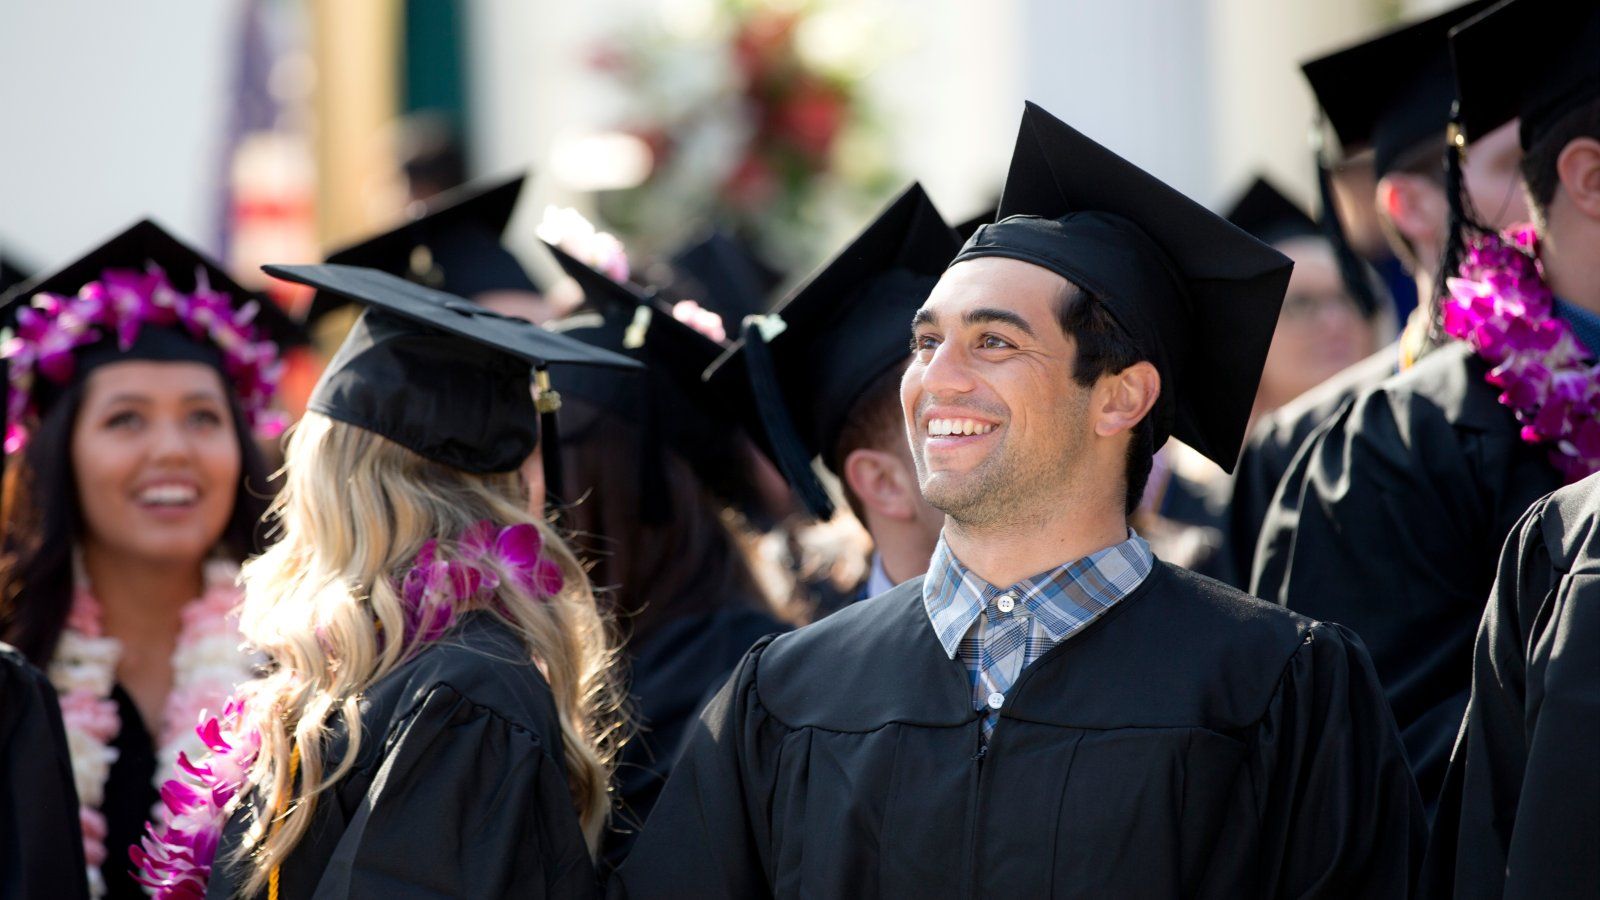 Male graduate student during commencement in crowd